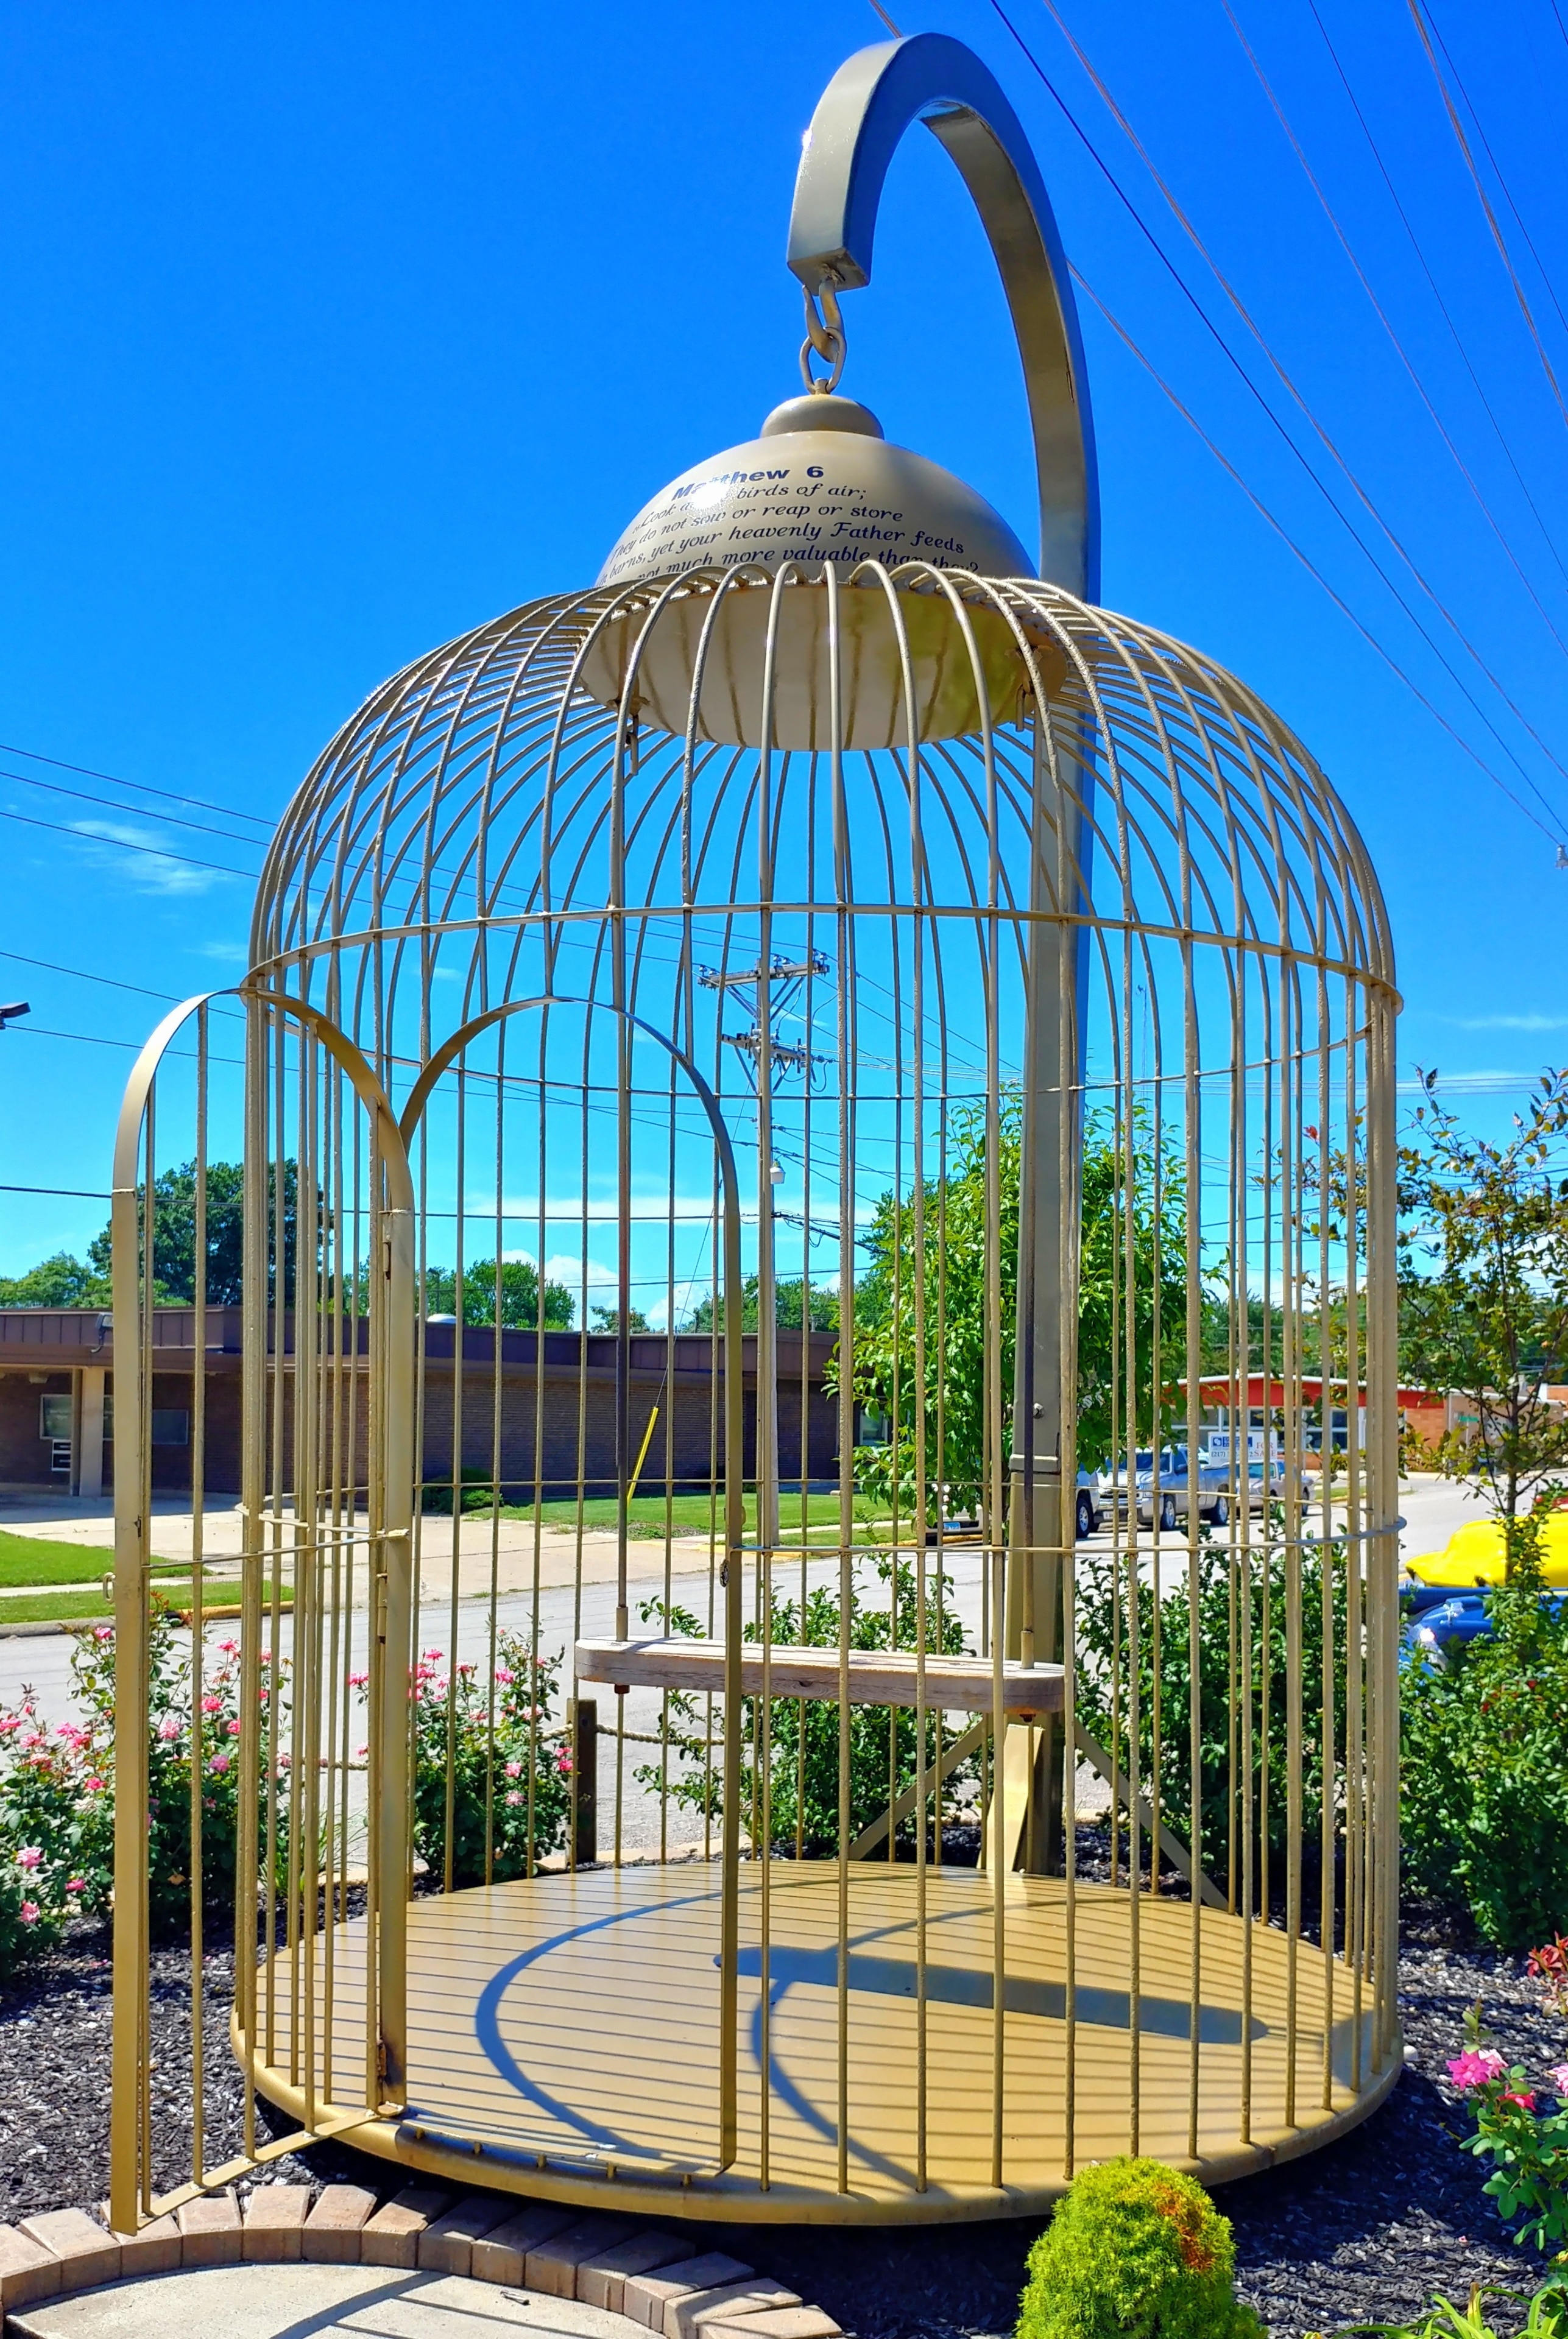 World's largest bird cage!

Casey, Illinois. Big things/small town! Just a short detour off the highway to an oasis of oversized household accoutrements.